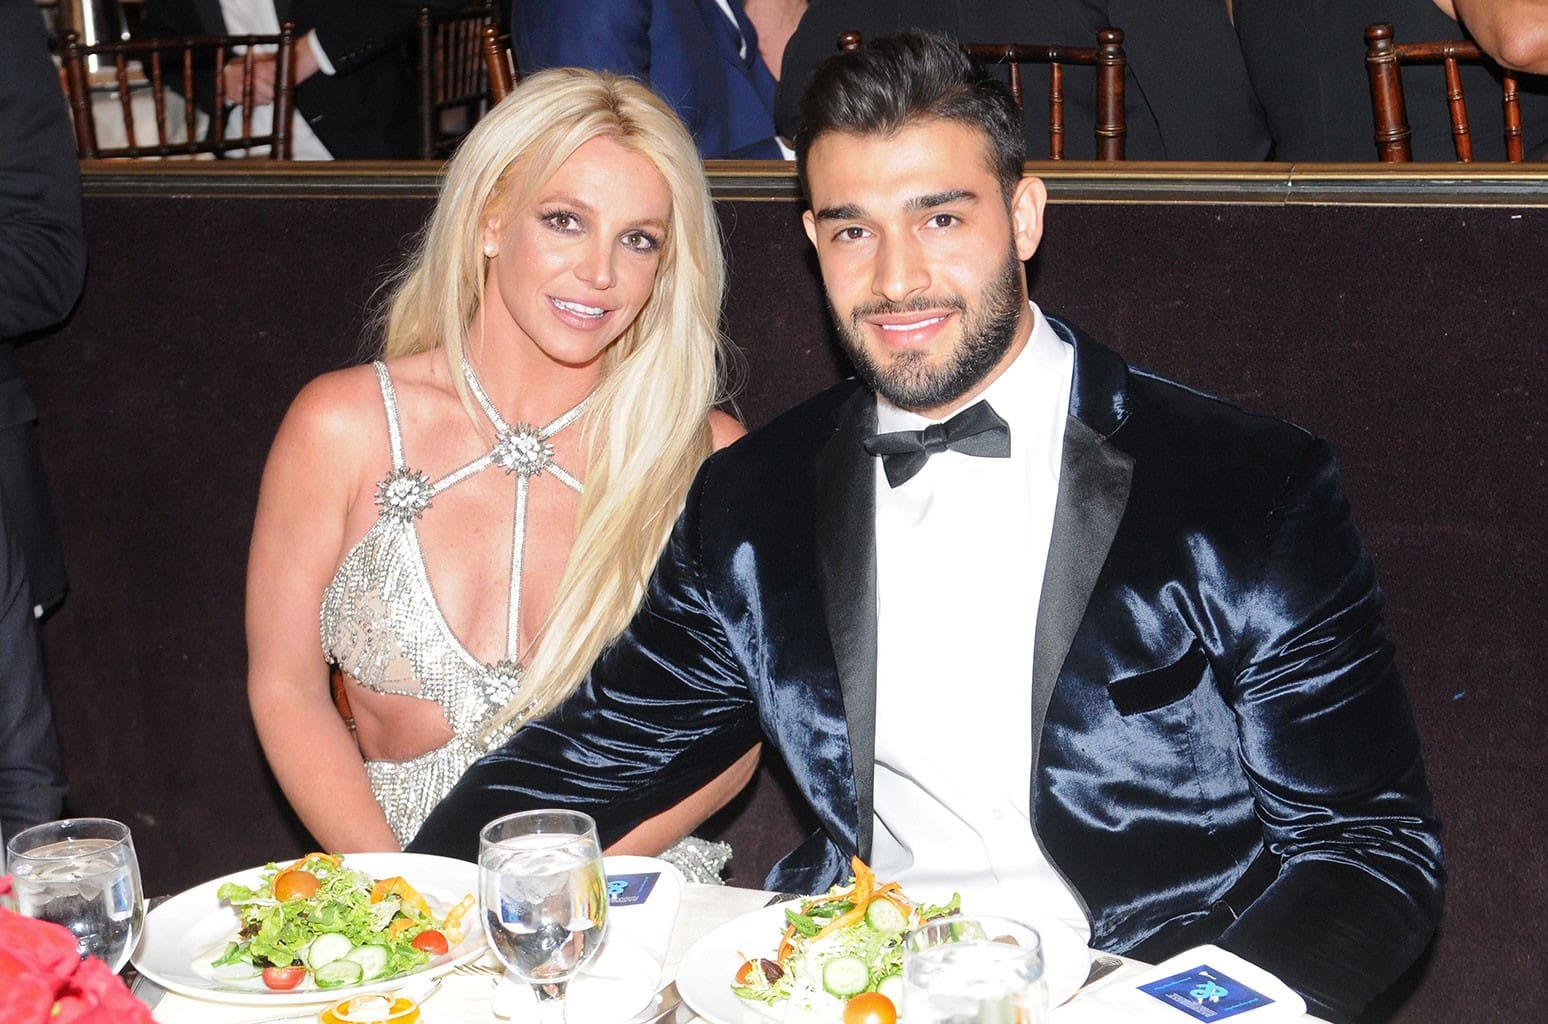 sam-asghari-says-he-and-britney-spears-have-been-secretly-married-for-years-and-have-twins-together-amid-engagement-rumors